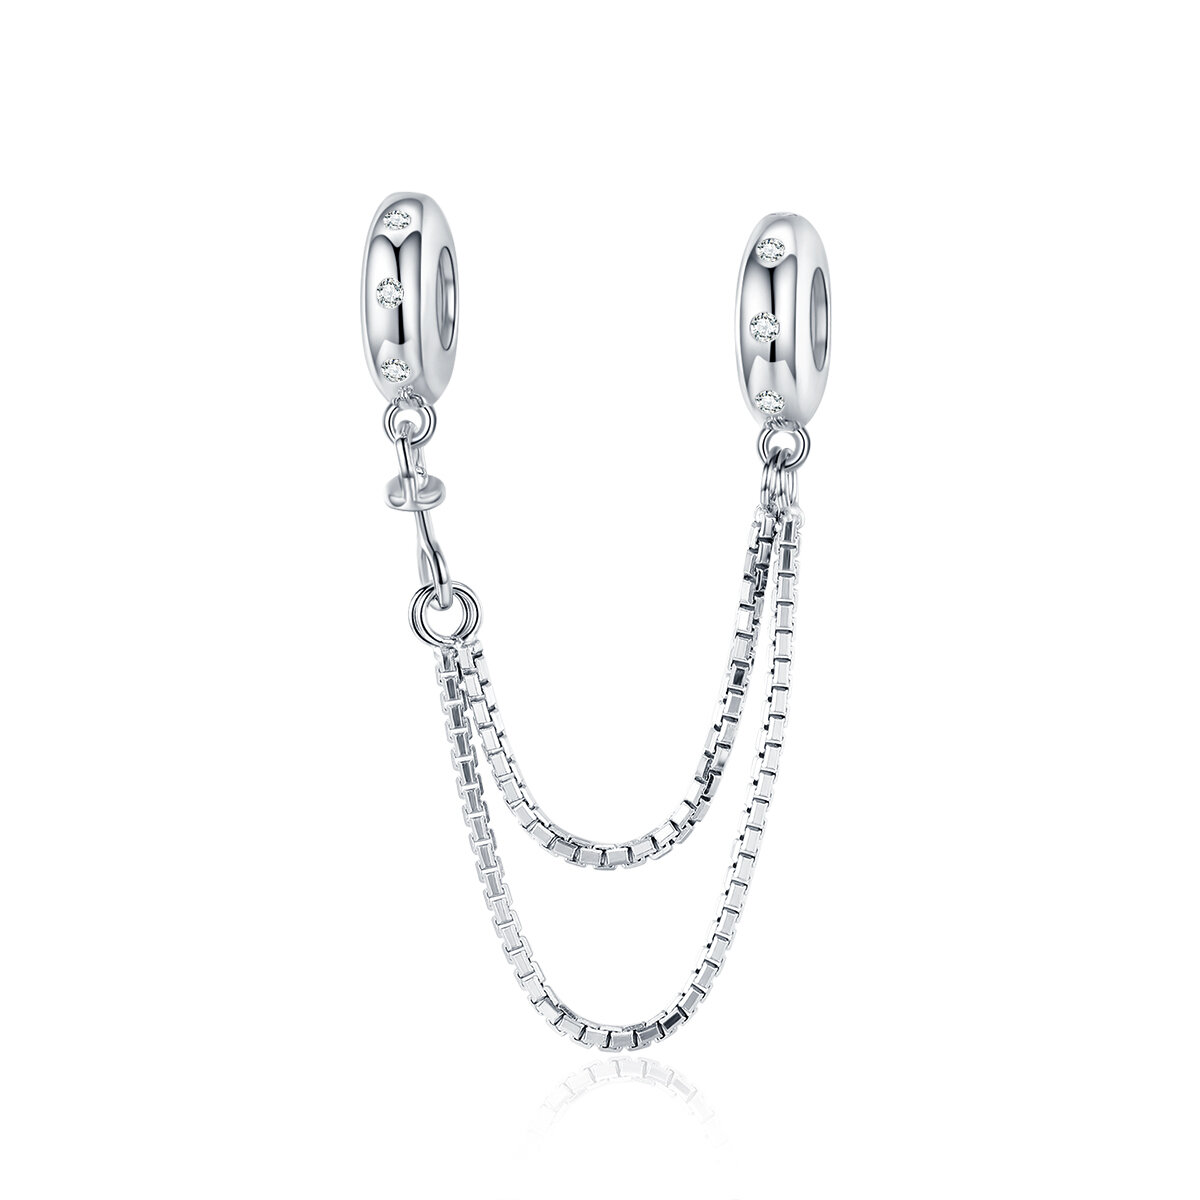 GemKing SCC1419 Simple chain S925 Sterling Silver Charm